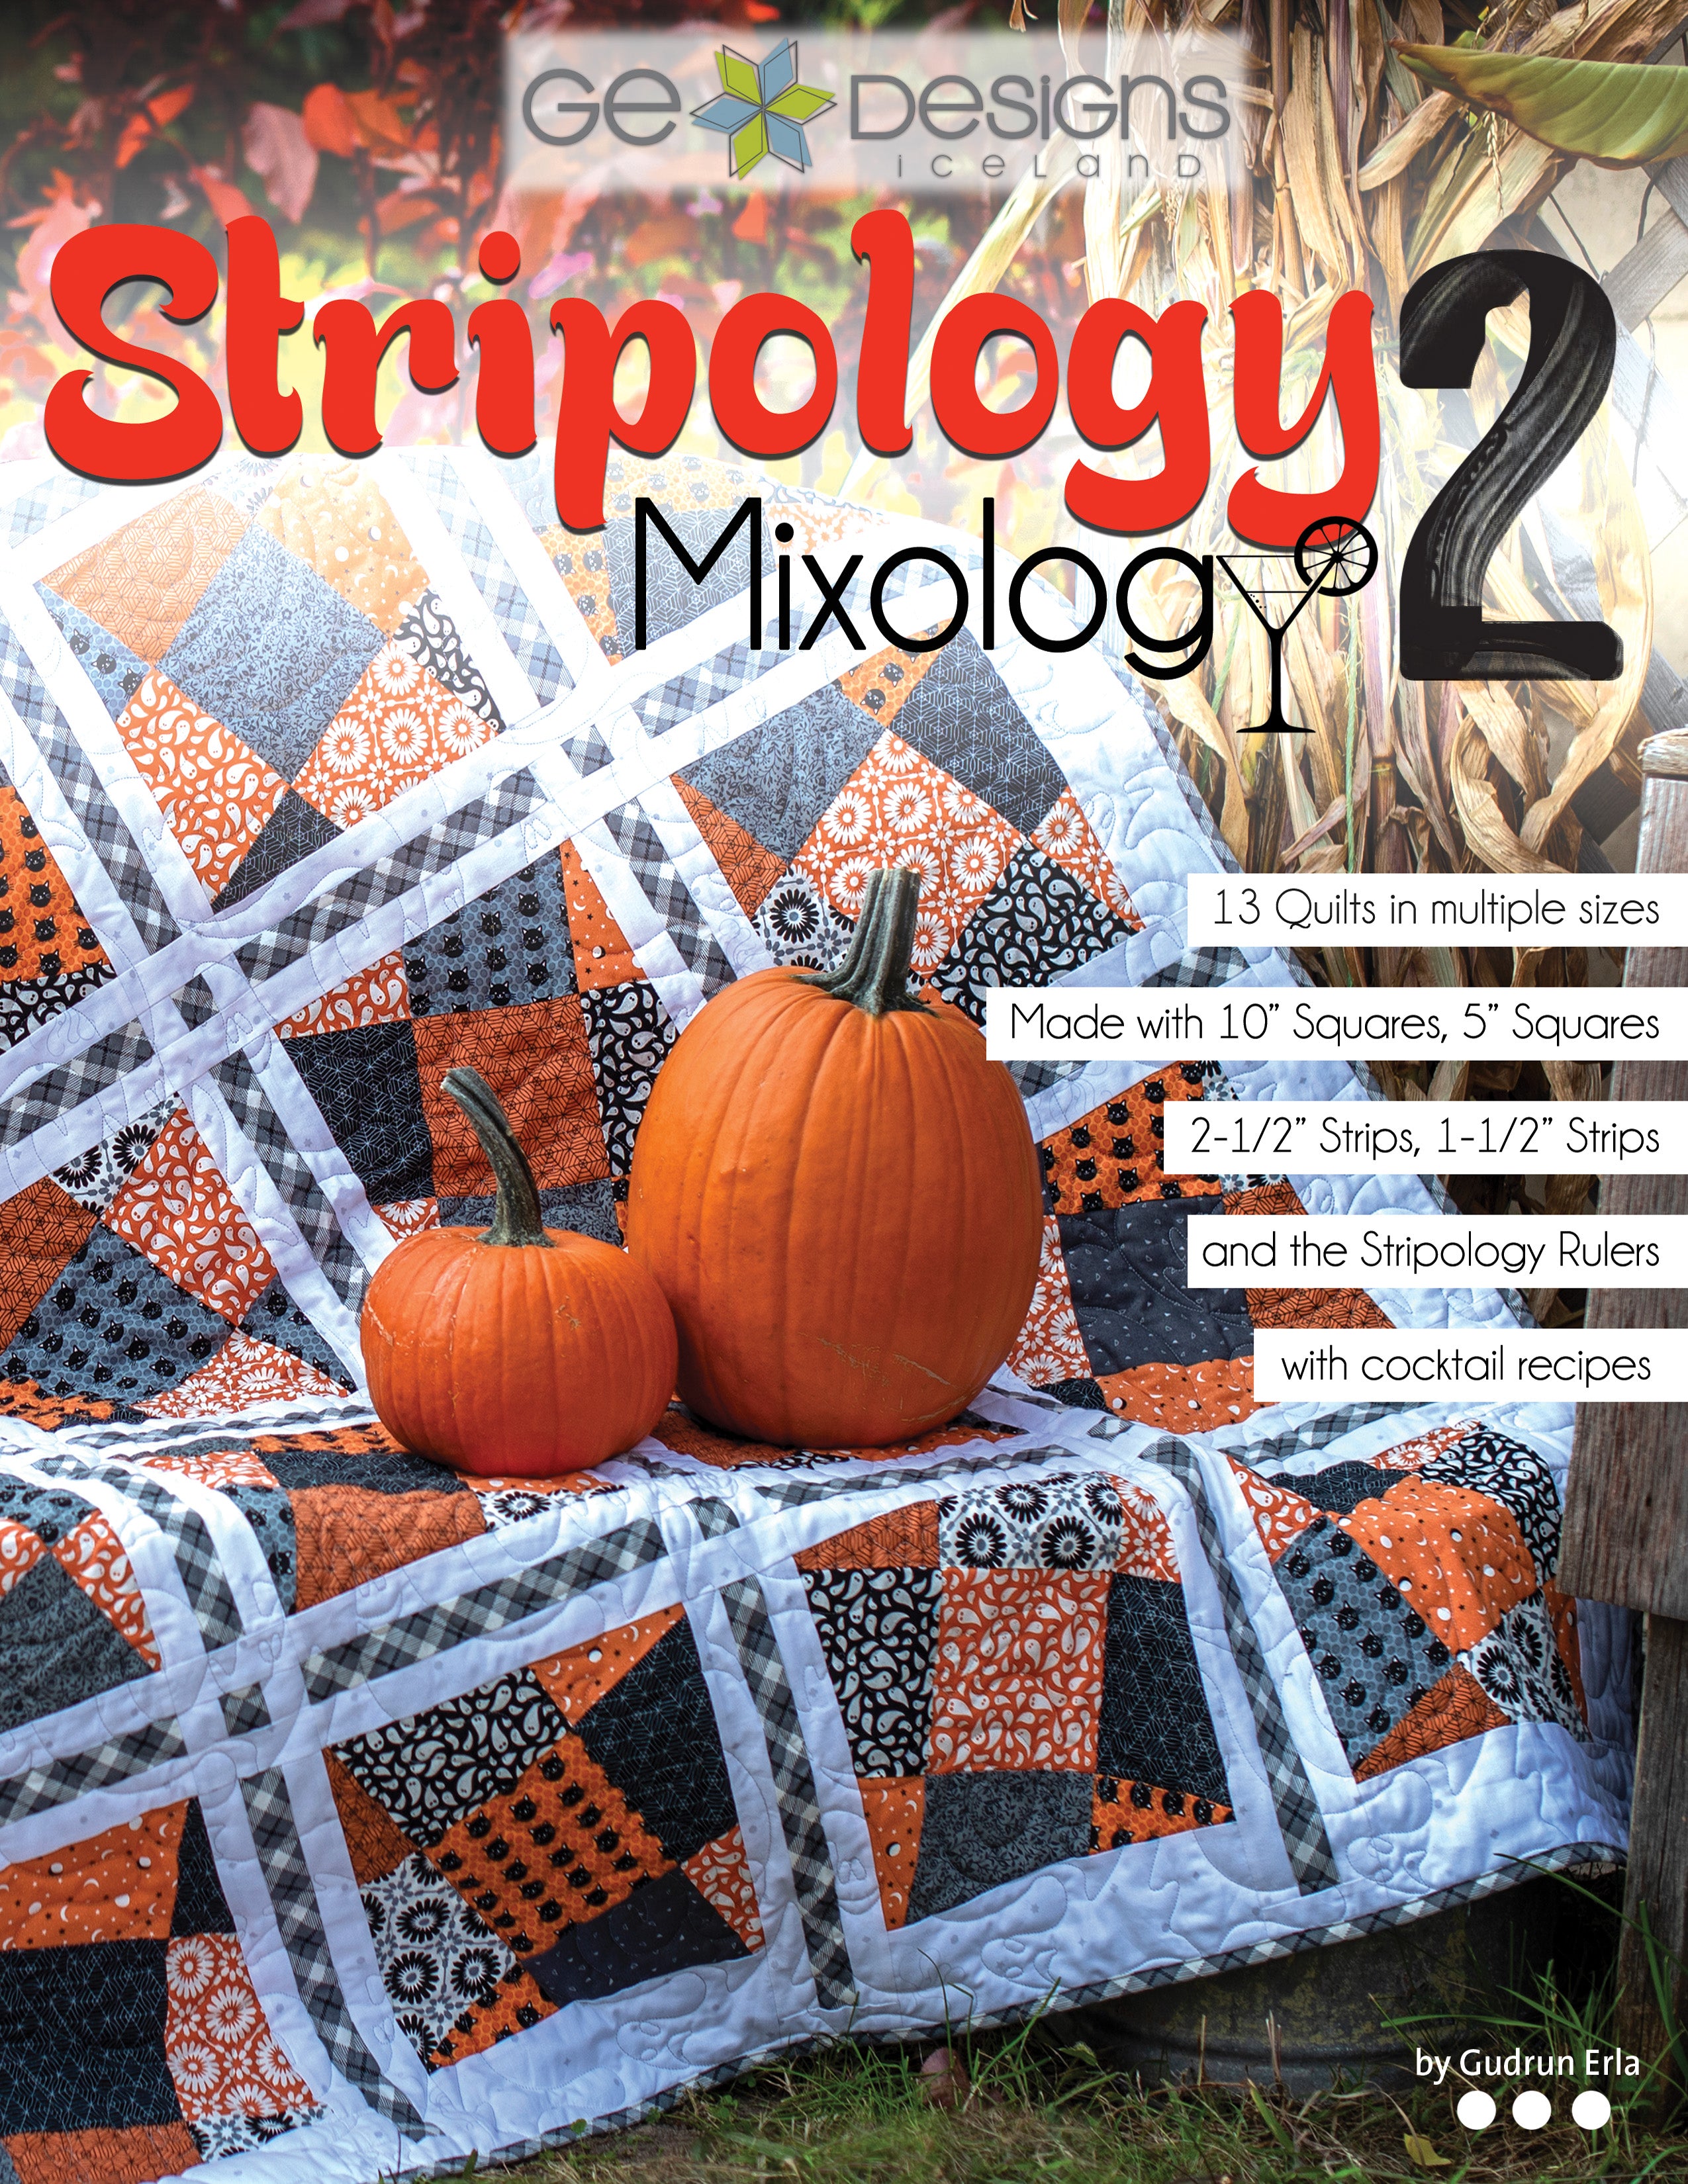 Trinity, Stripology Mixer Pattern by GE Designs – Artistic Artifacts